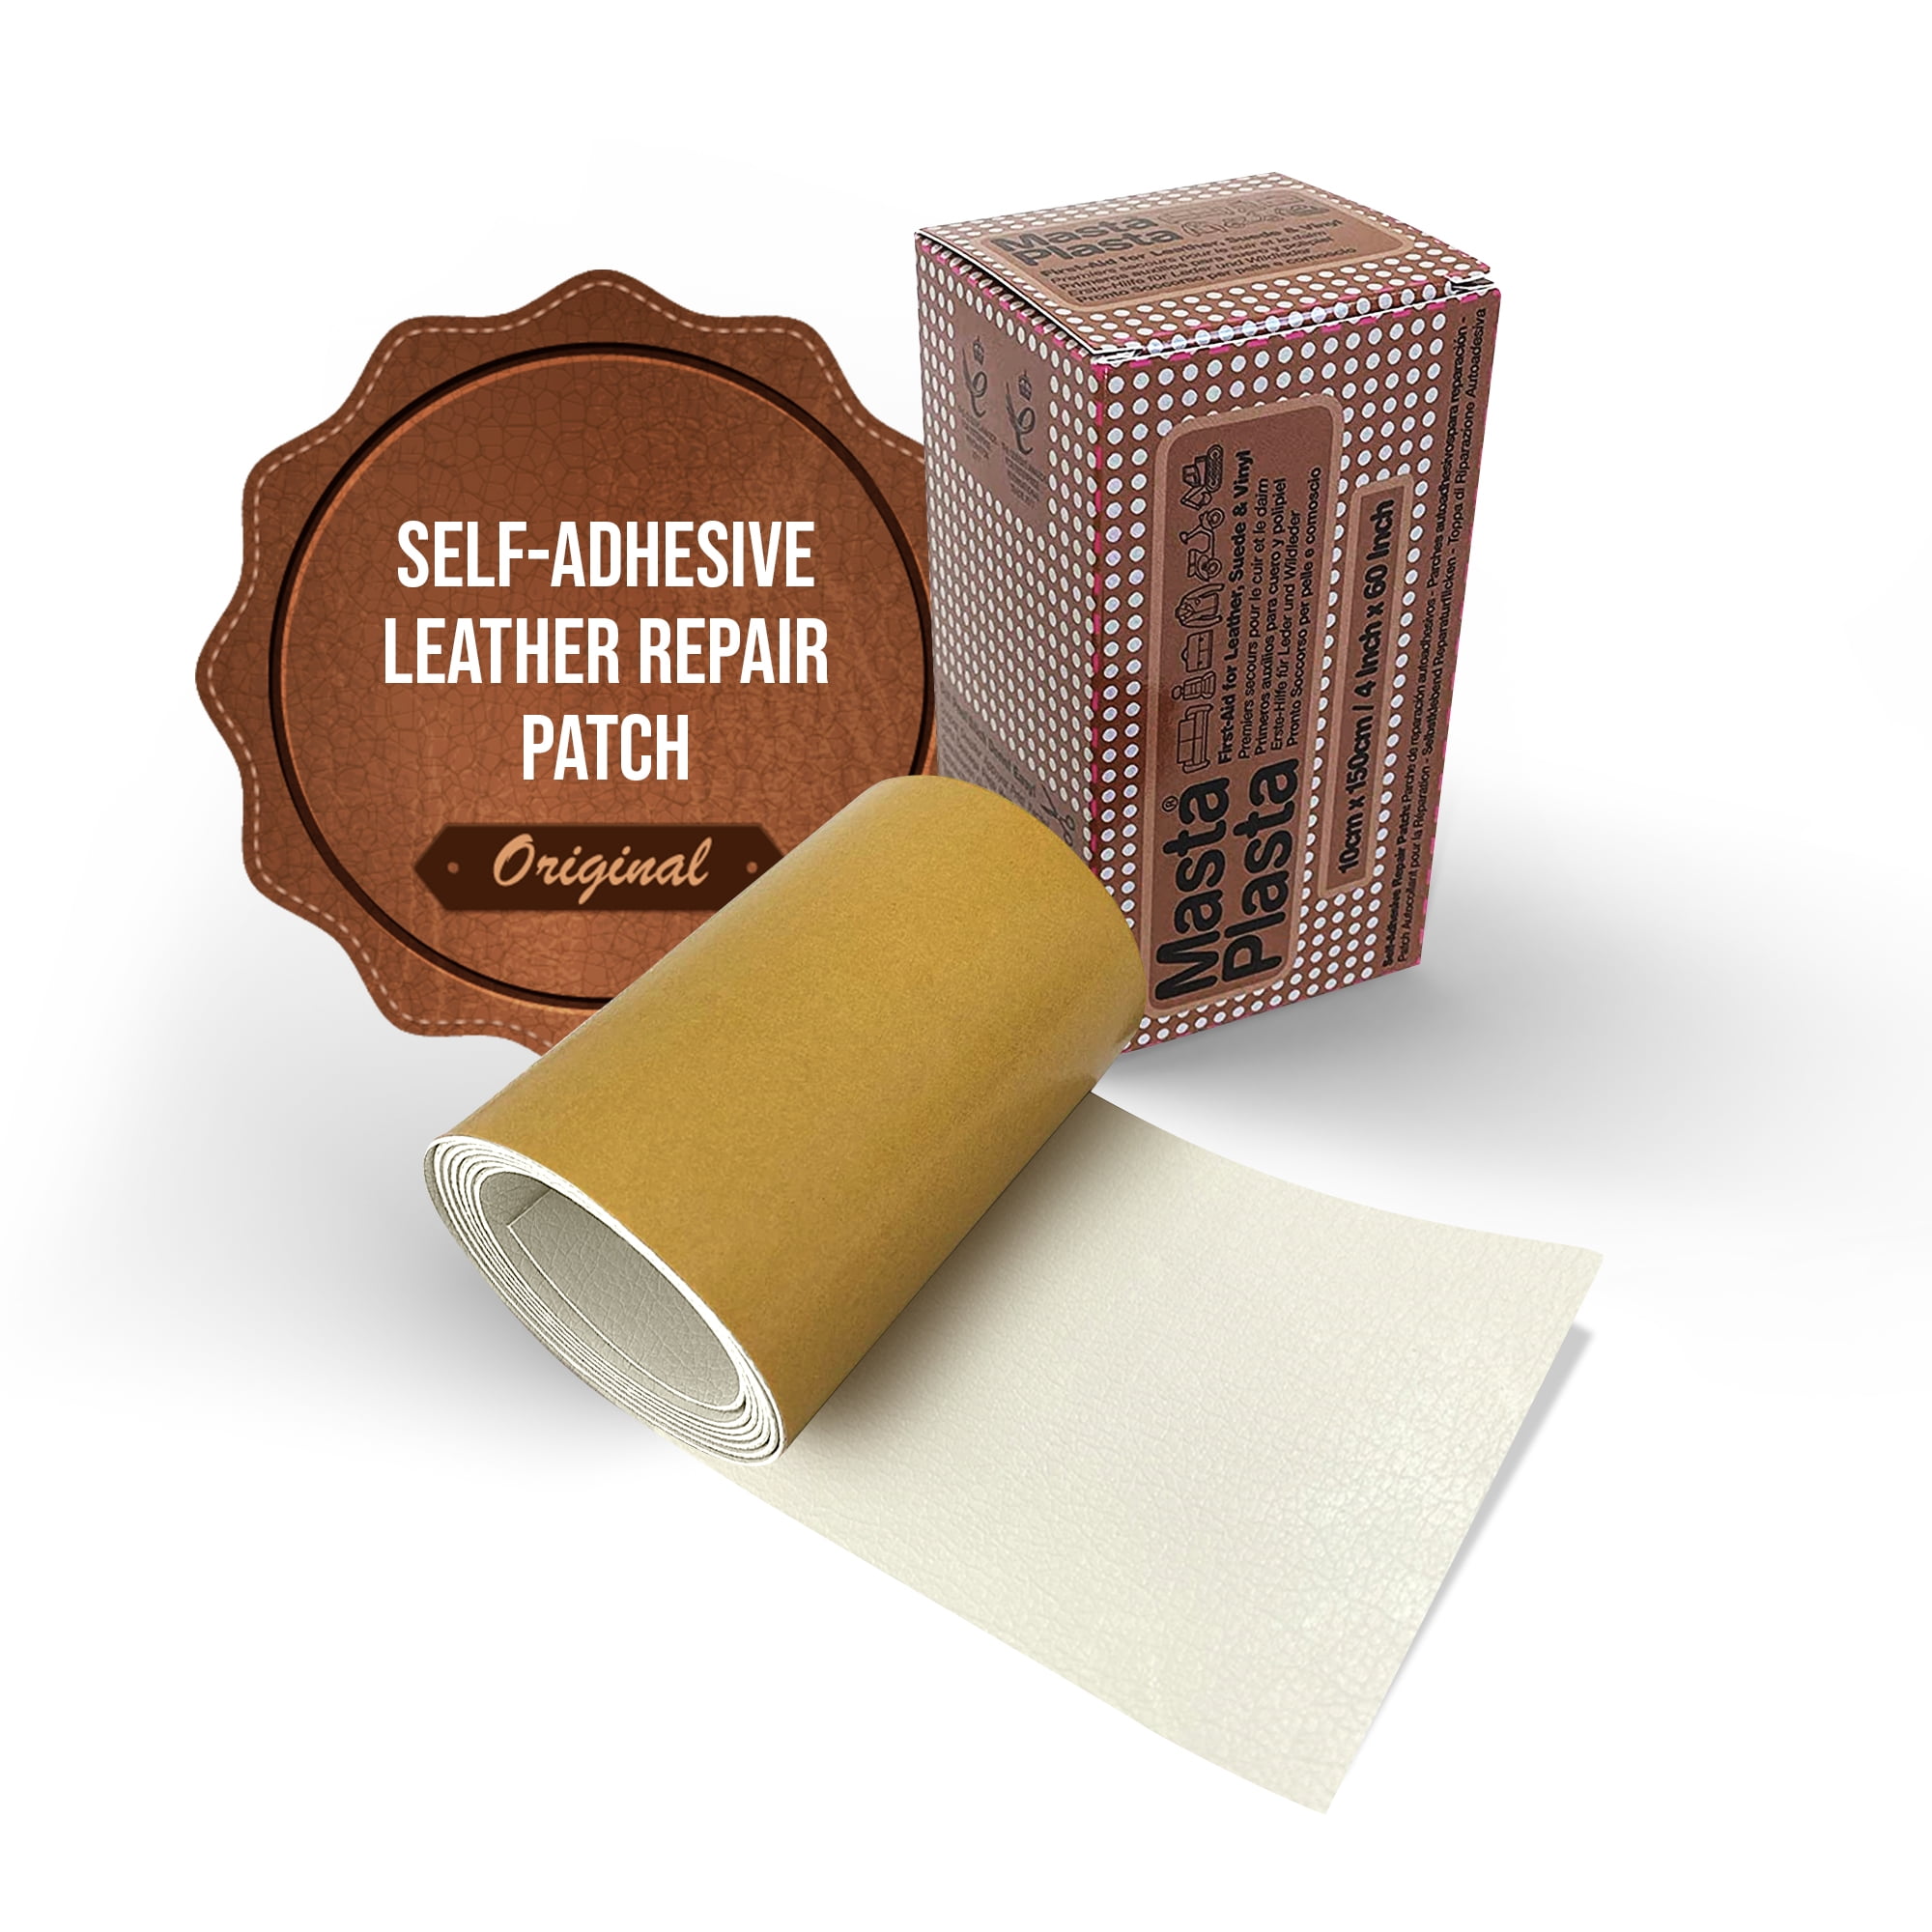 Pelle Patch - Dark Brown Leather Repair Kit for Couches - Vinyl